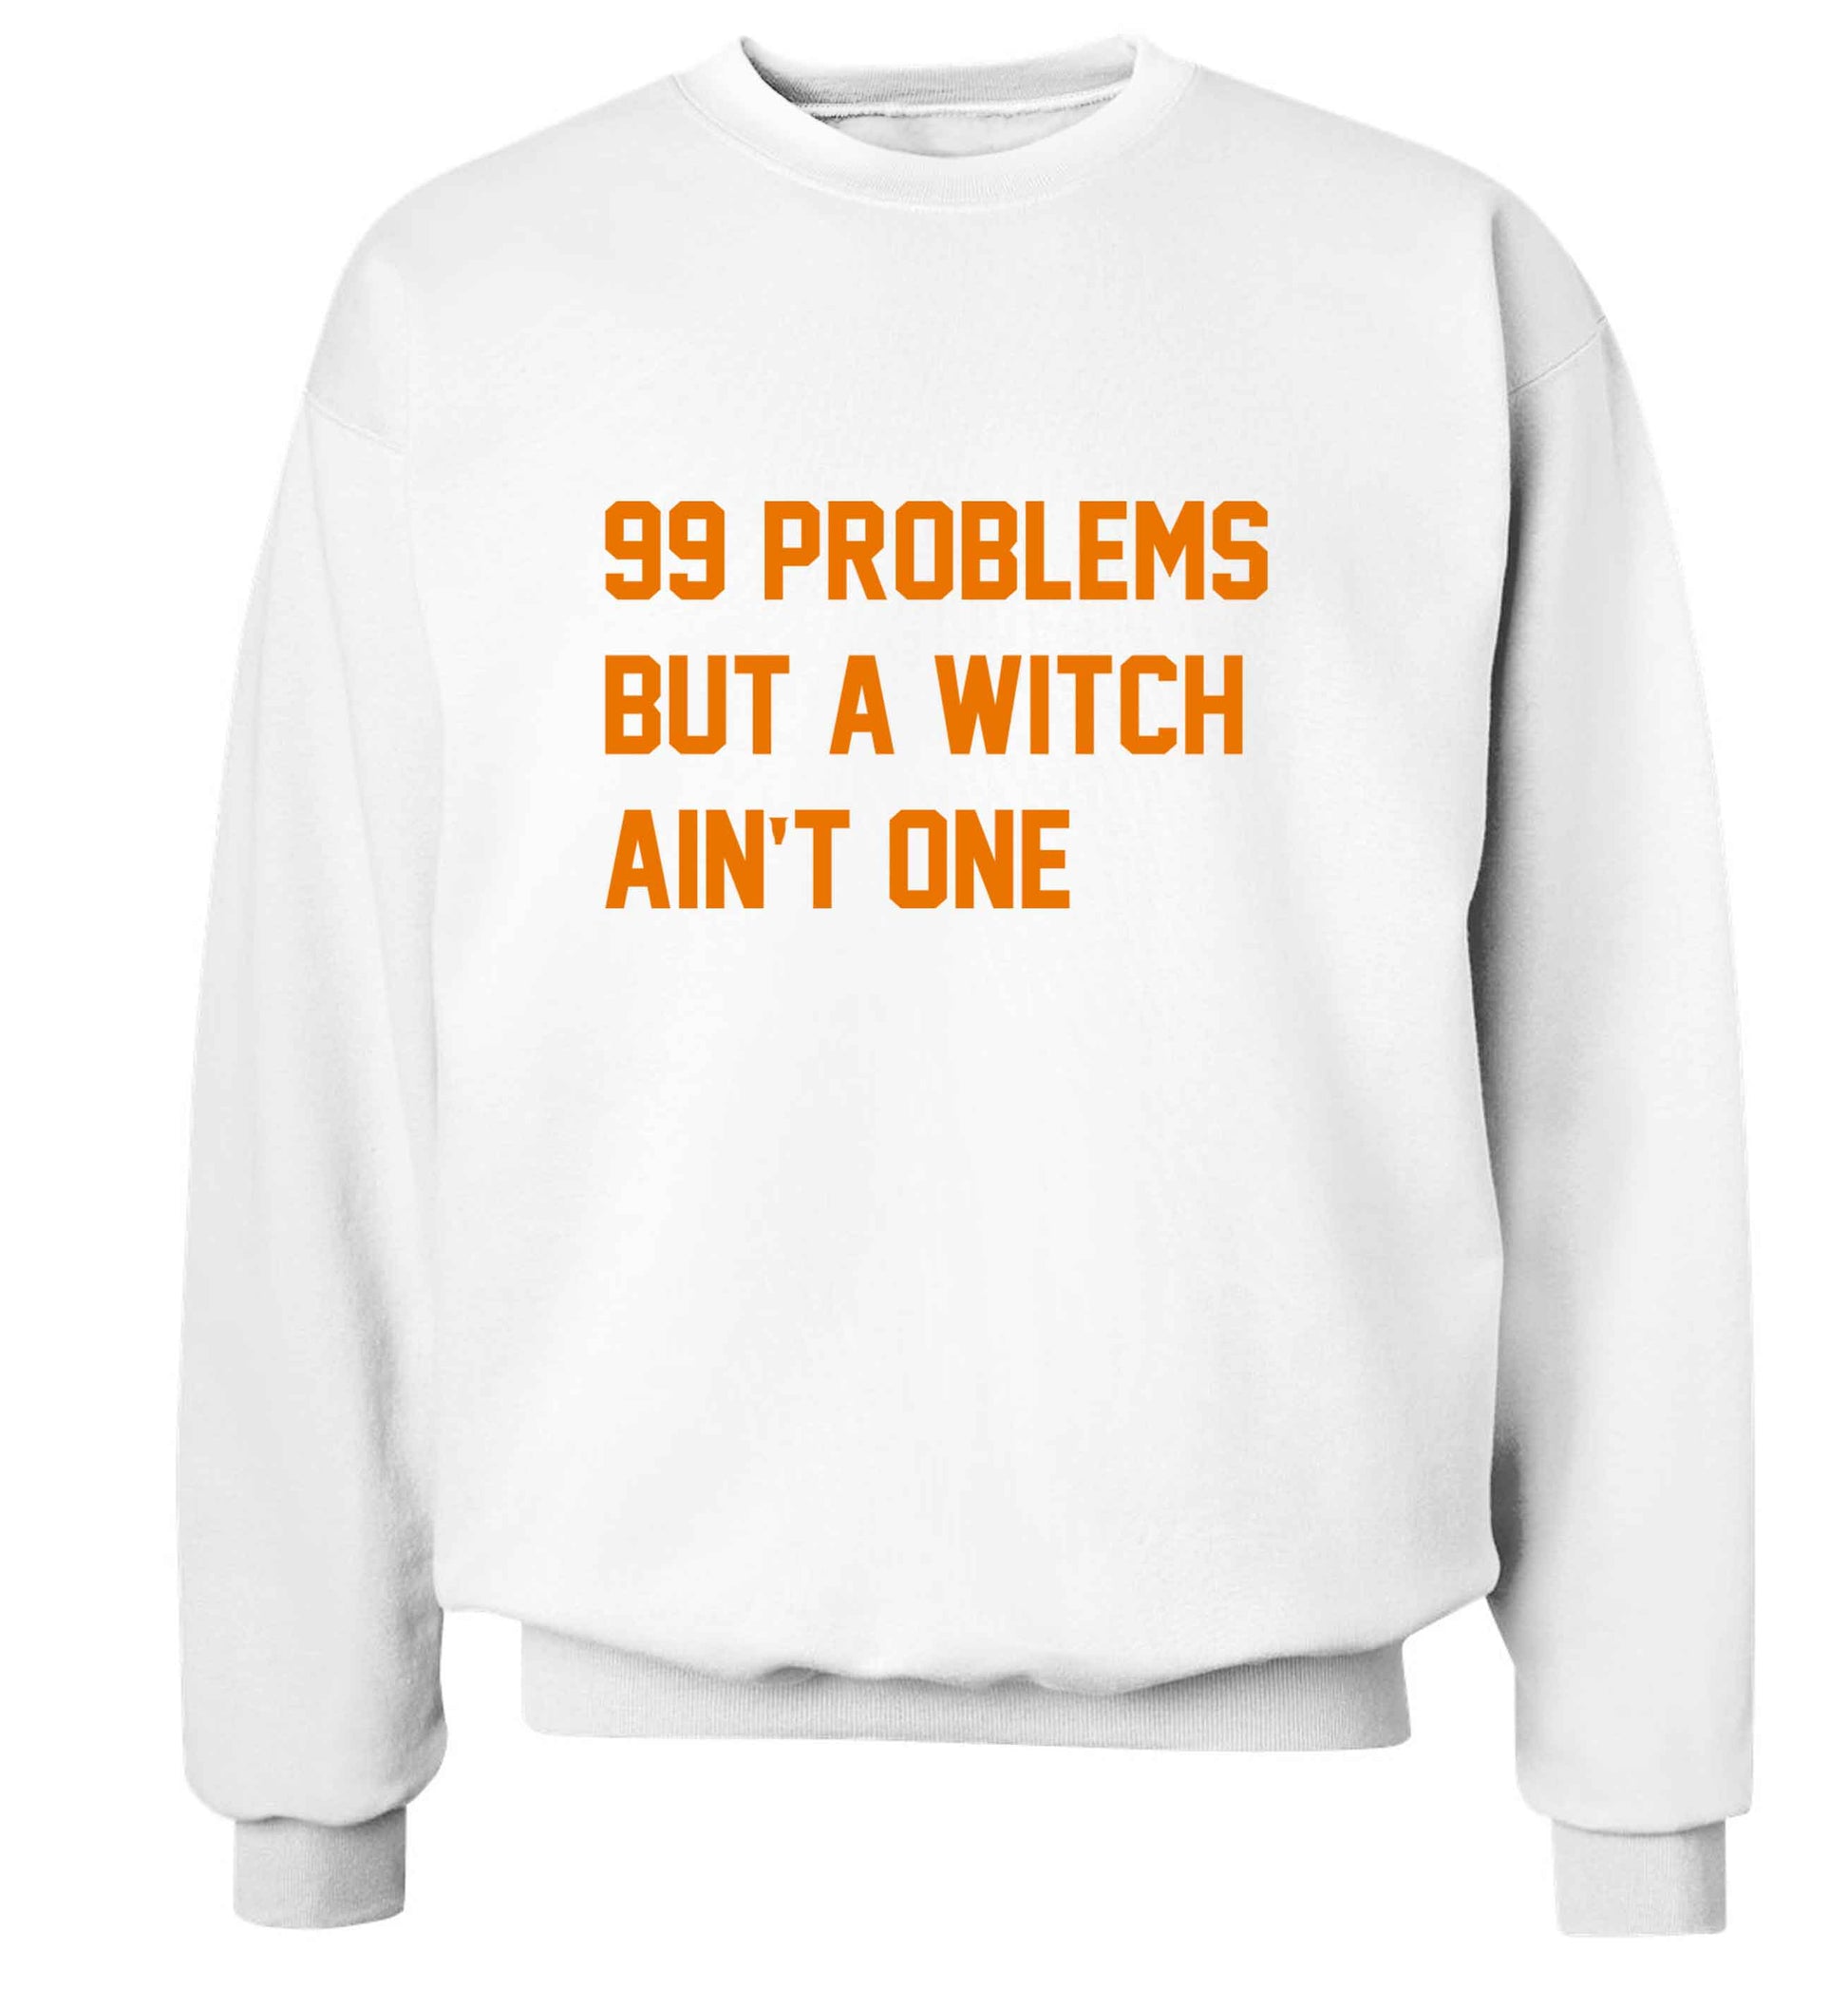 99 Problems but a witch aint one adult's unisex white sweater 2XL